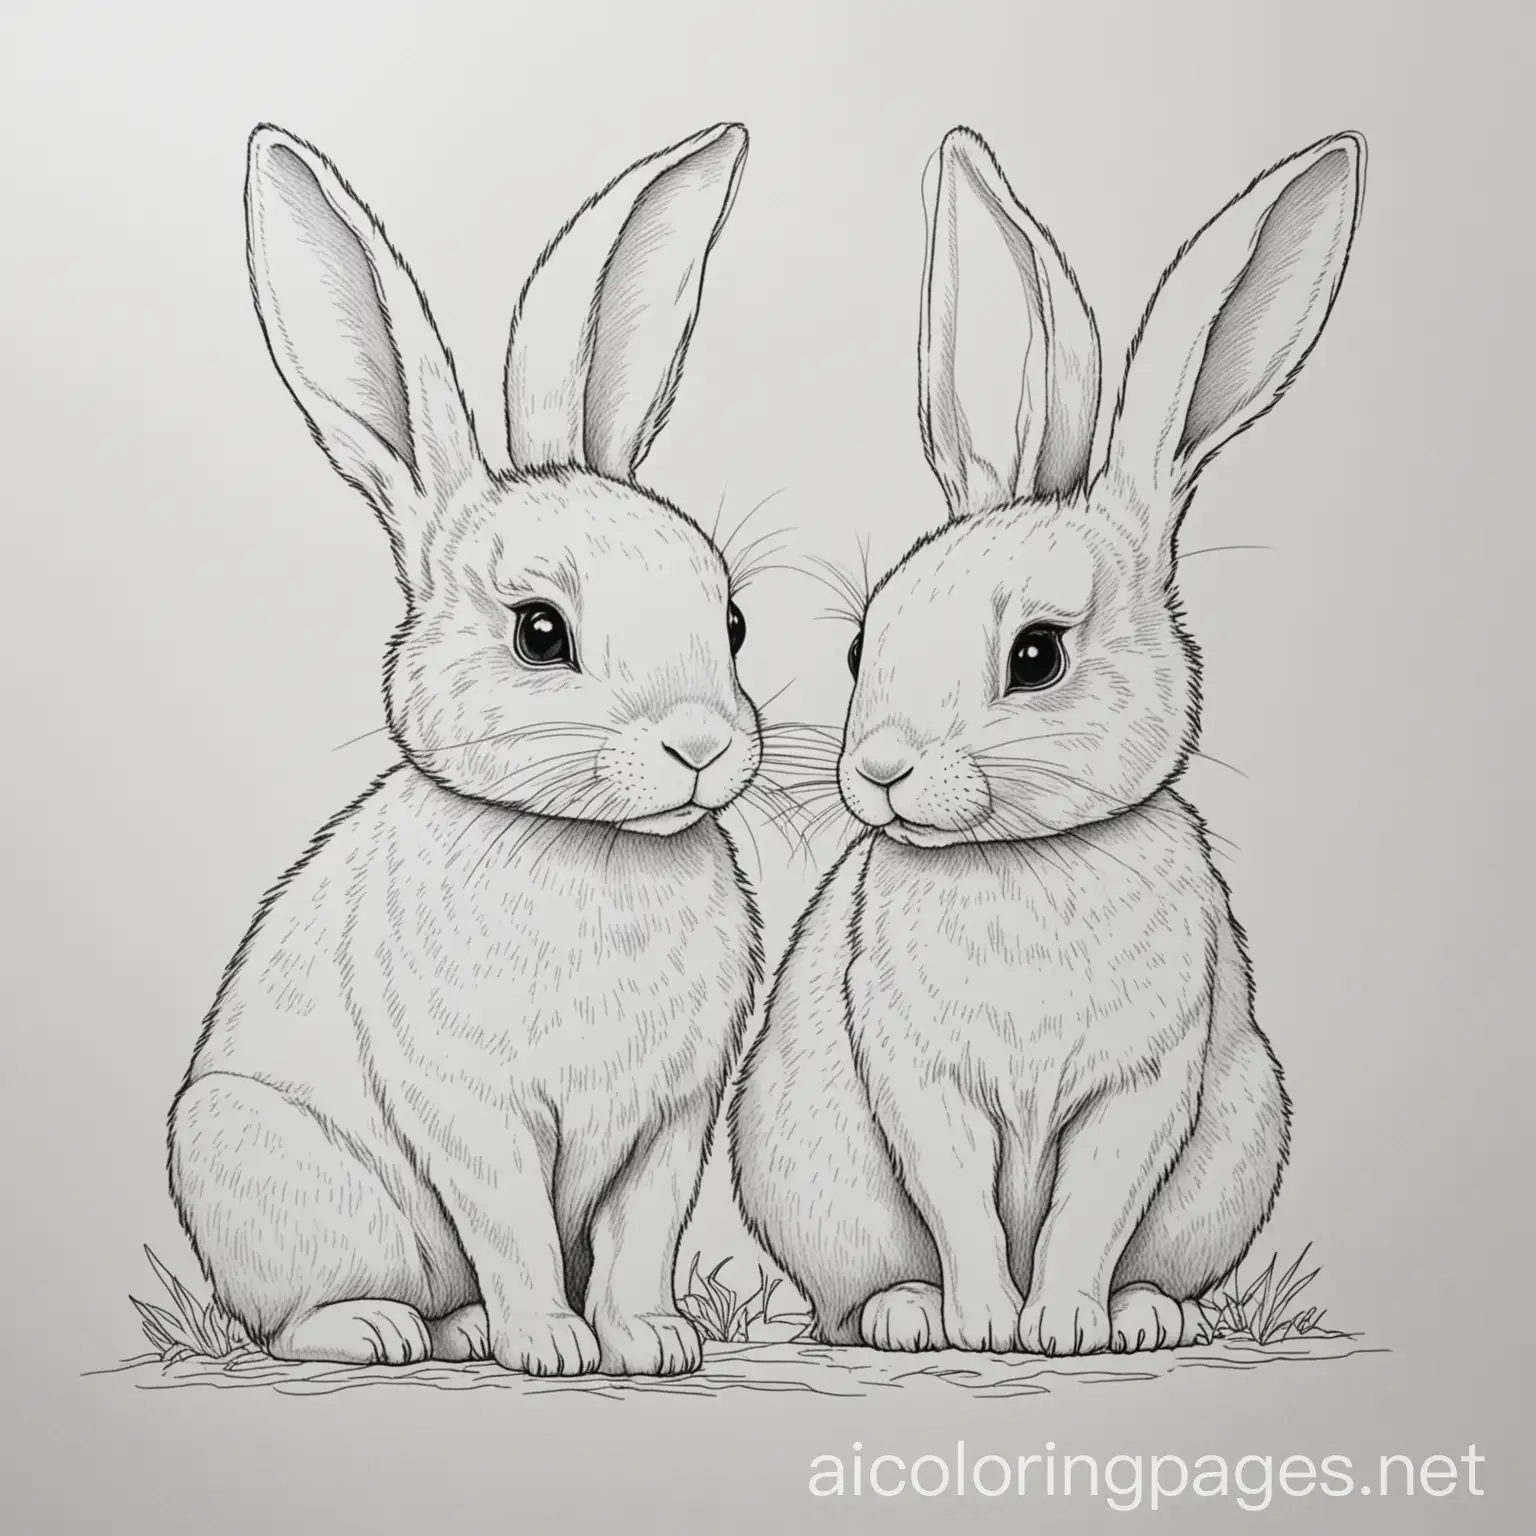 rabbits, Coloring Page, black and white, line art, white background, Simplicity, Ample White Space